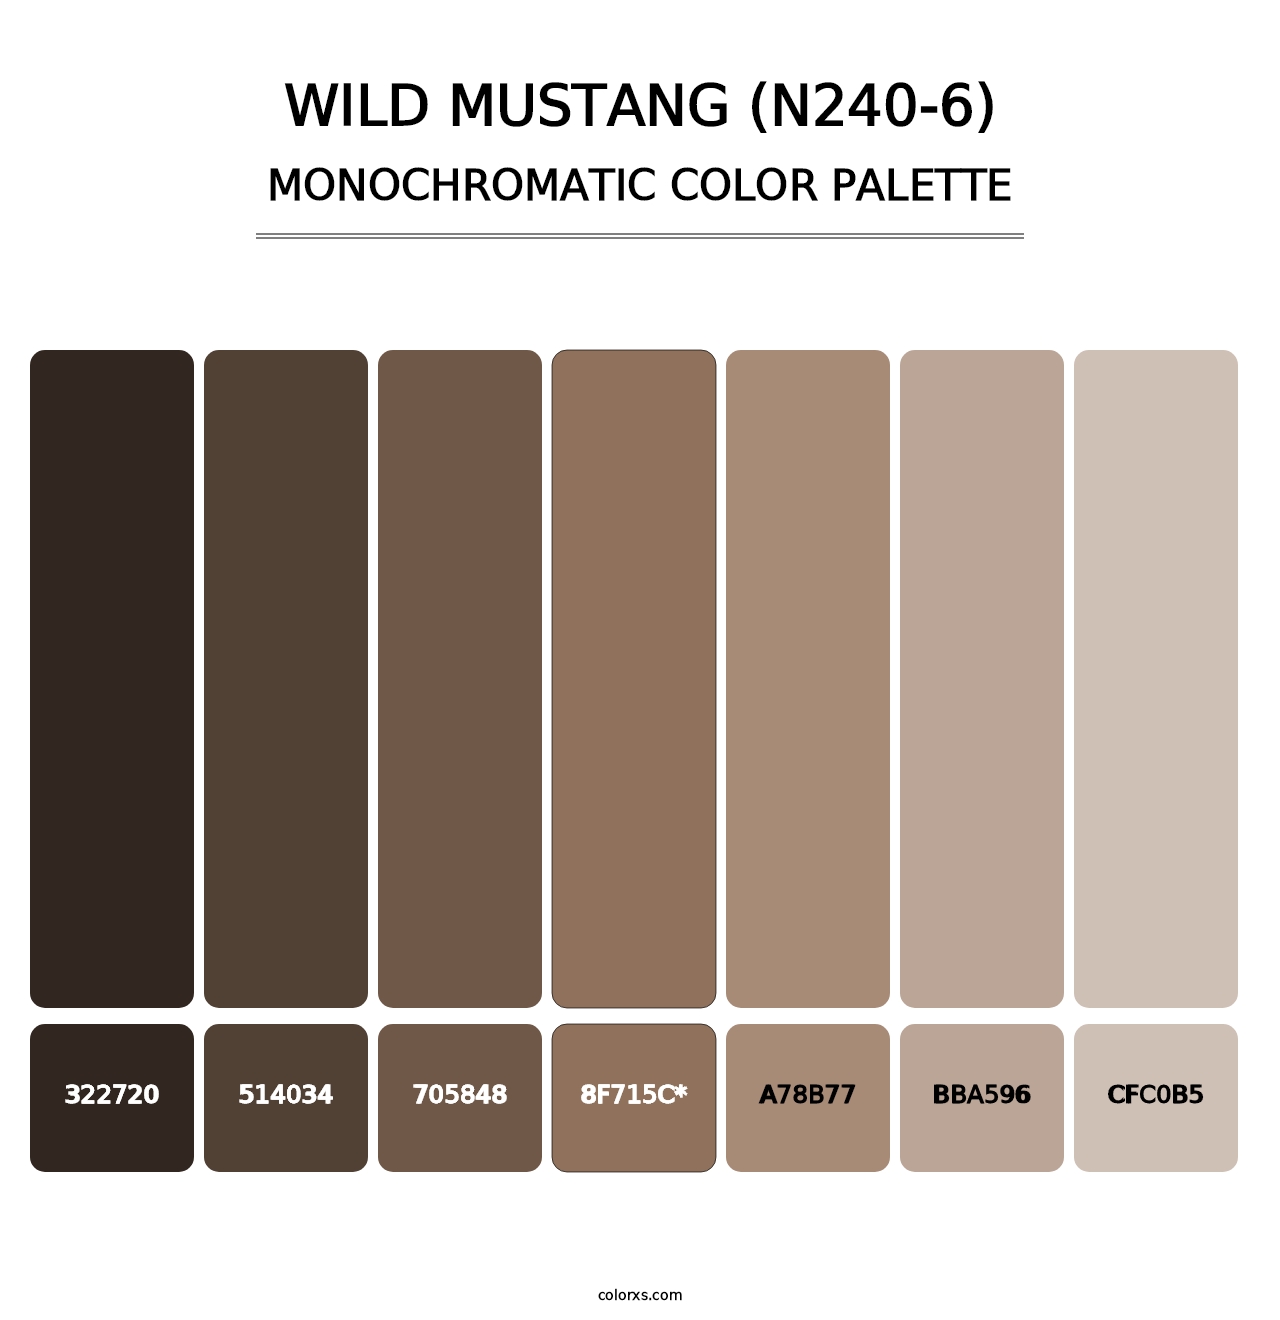 Wild Mustang (N240-6) - Monochromatic Color Palette